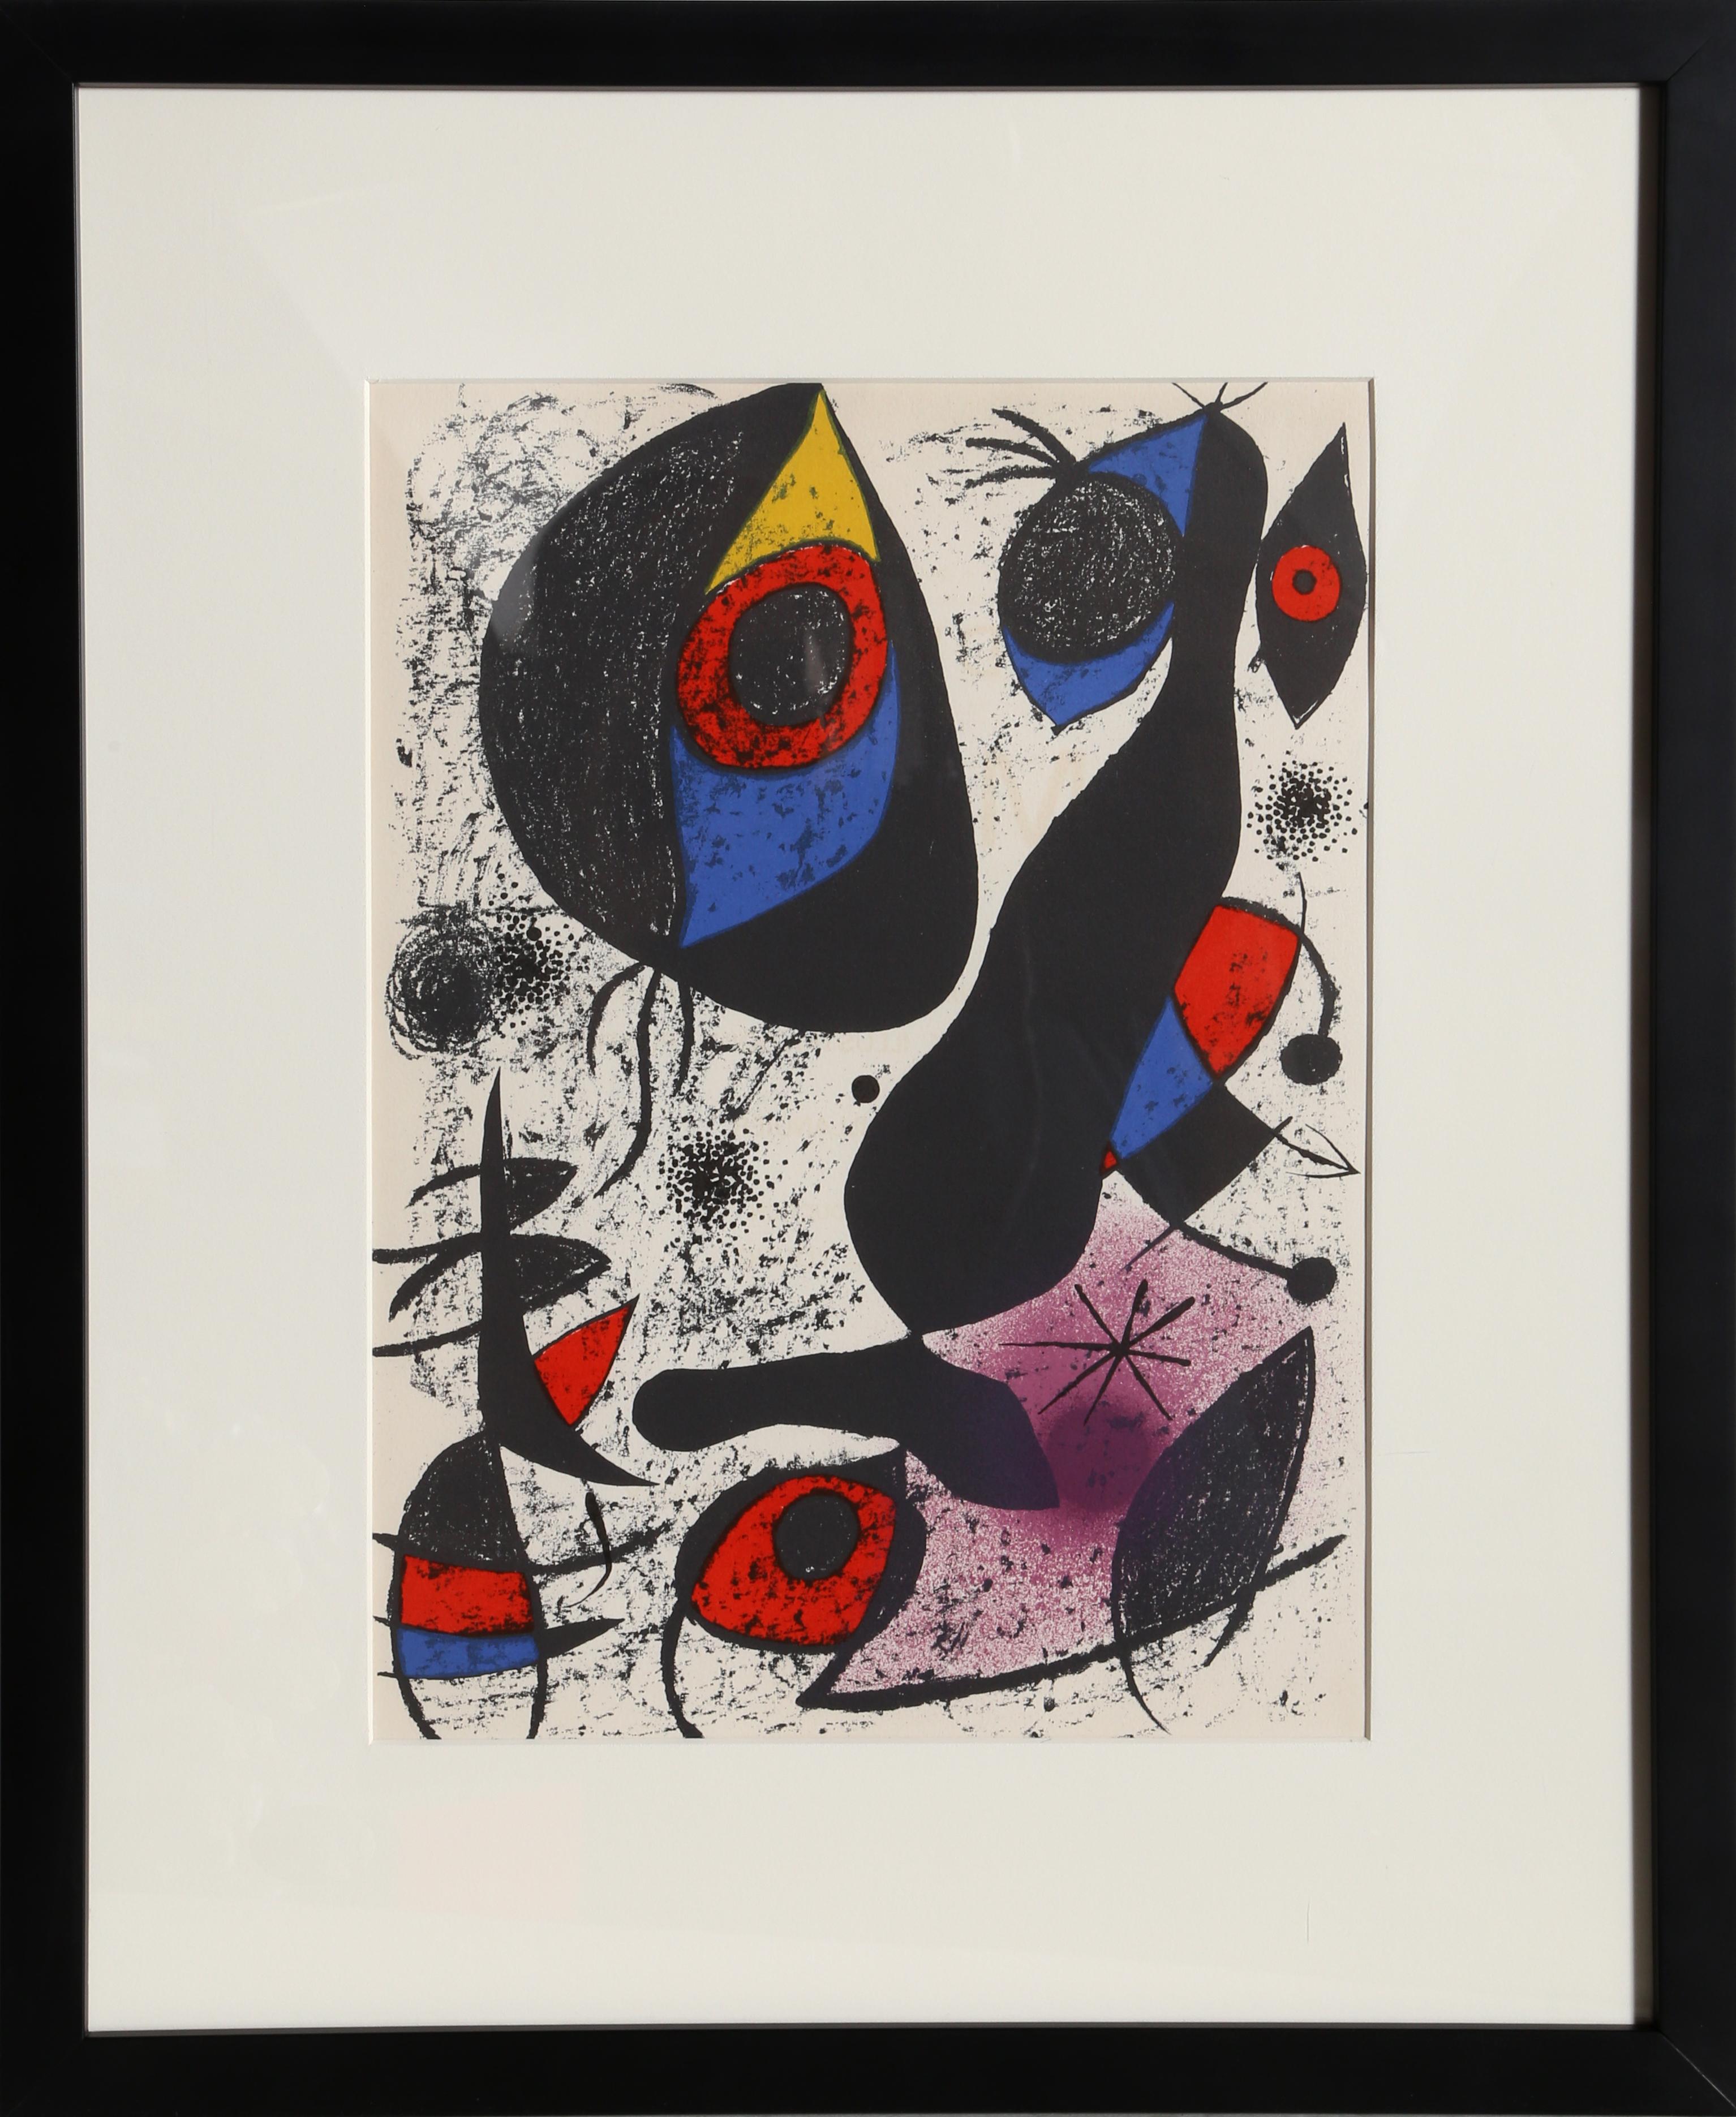 An original Joan Miro lithograph originally published in "Indelible Miro".

Miro a l’Encre I (Cramer 161)
Joan Miro, Spanish (1893–1983)
Date: 1972
Lithograph on Wove Paper
Size: 13.5 x 10 in. (34.29 x 25.4 cm)
Frame Size: 24 x 19.5 inches
Printer: